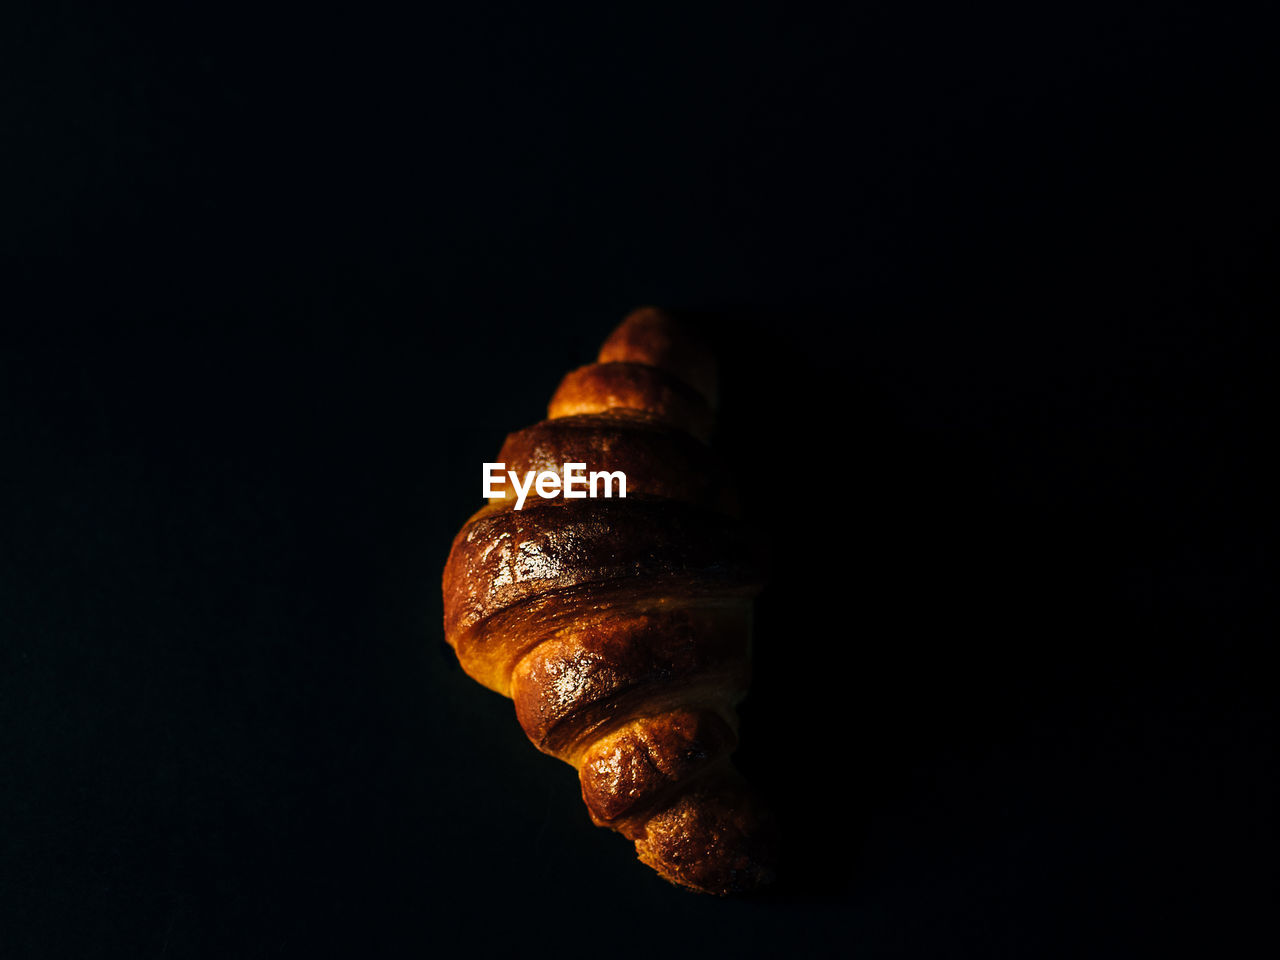 Croissant like dark side of the moon